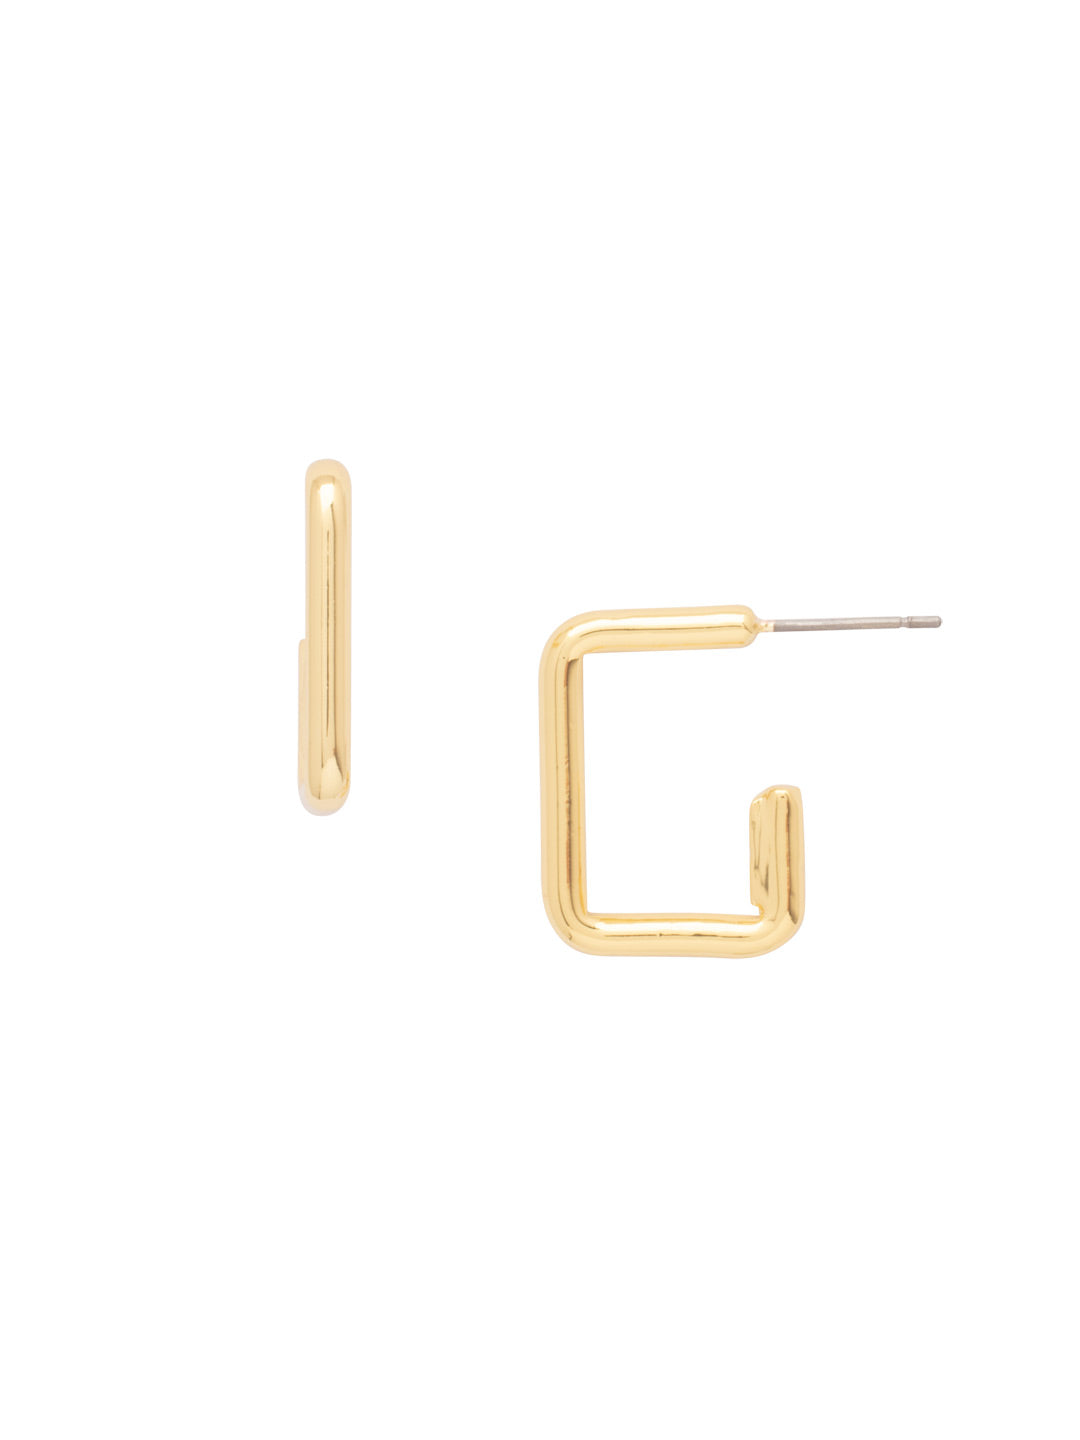 Geo Mini Hoop Earrings - 4EFL14BGMTL - <p>The Geo Mini Hoop Earrings feature a small open-back rectangular metal chain link on a post. From Sorrelli's Bare Metallic collection in our Bright Gold-tone finish.</p>